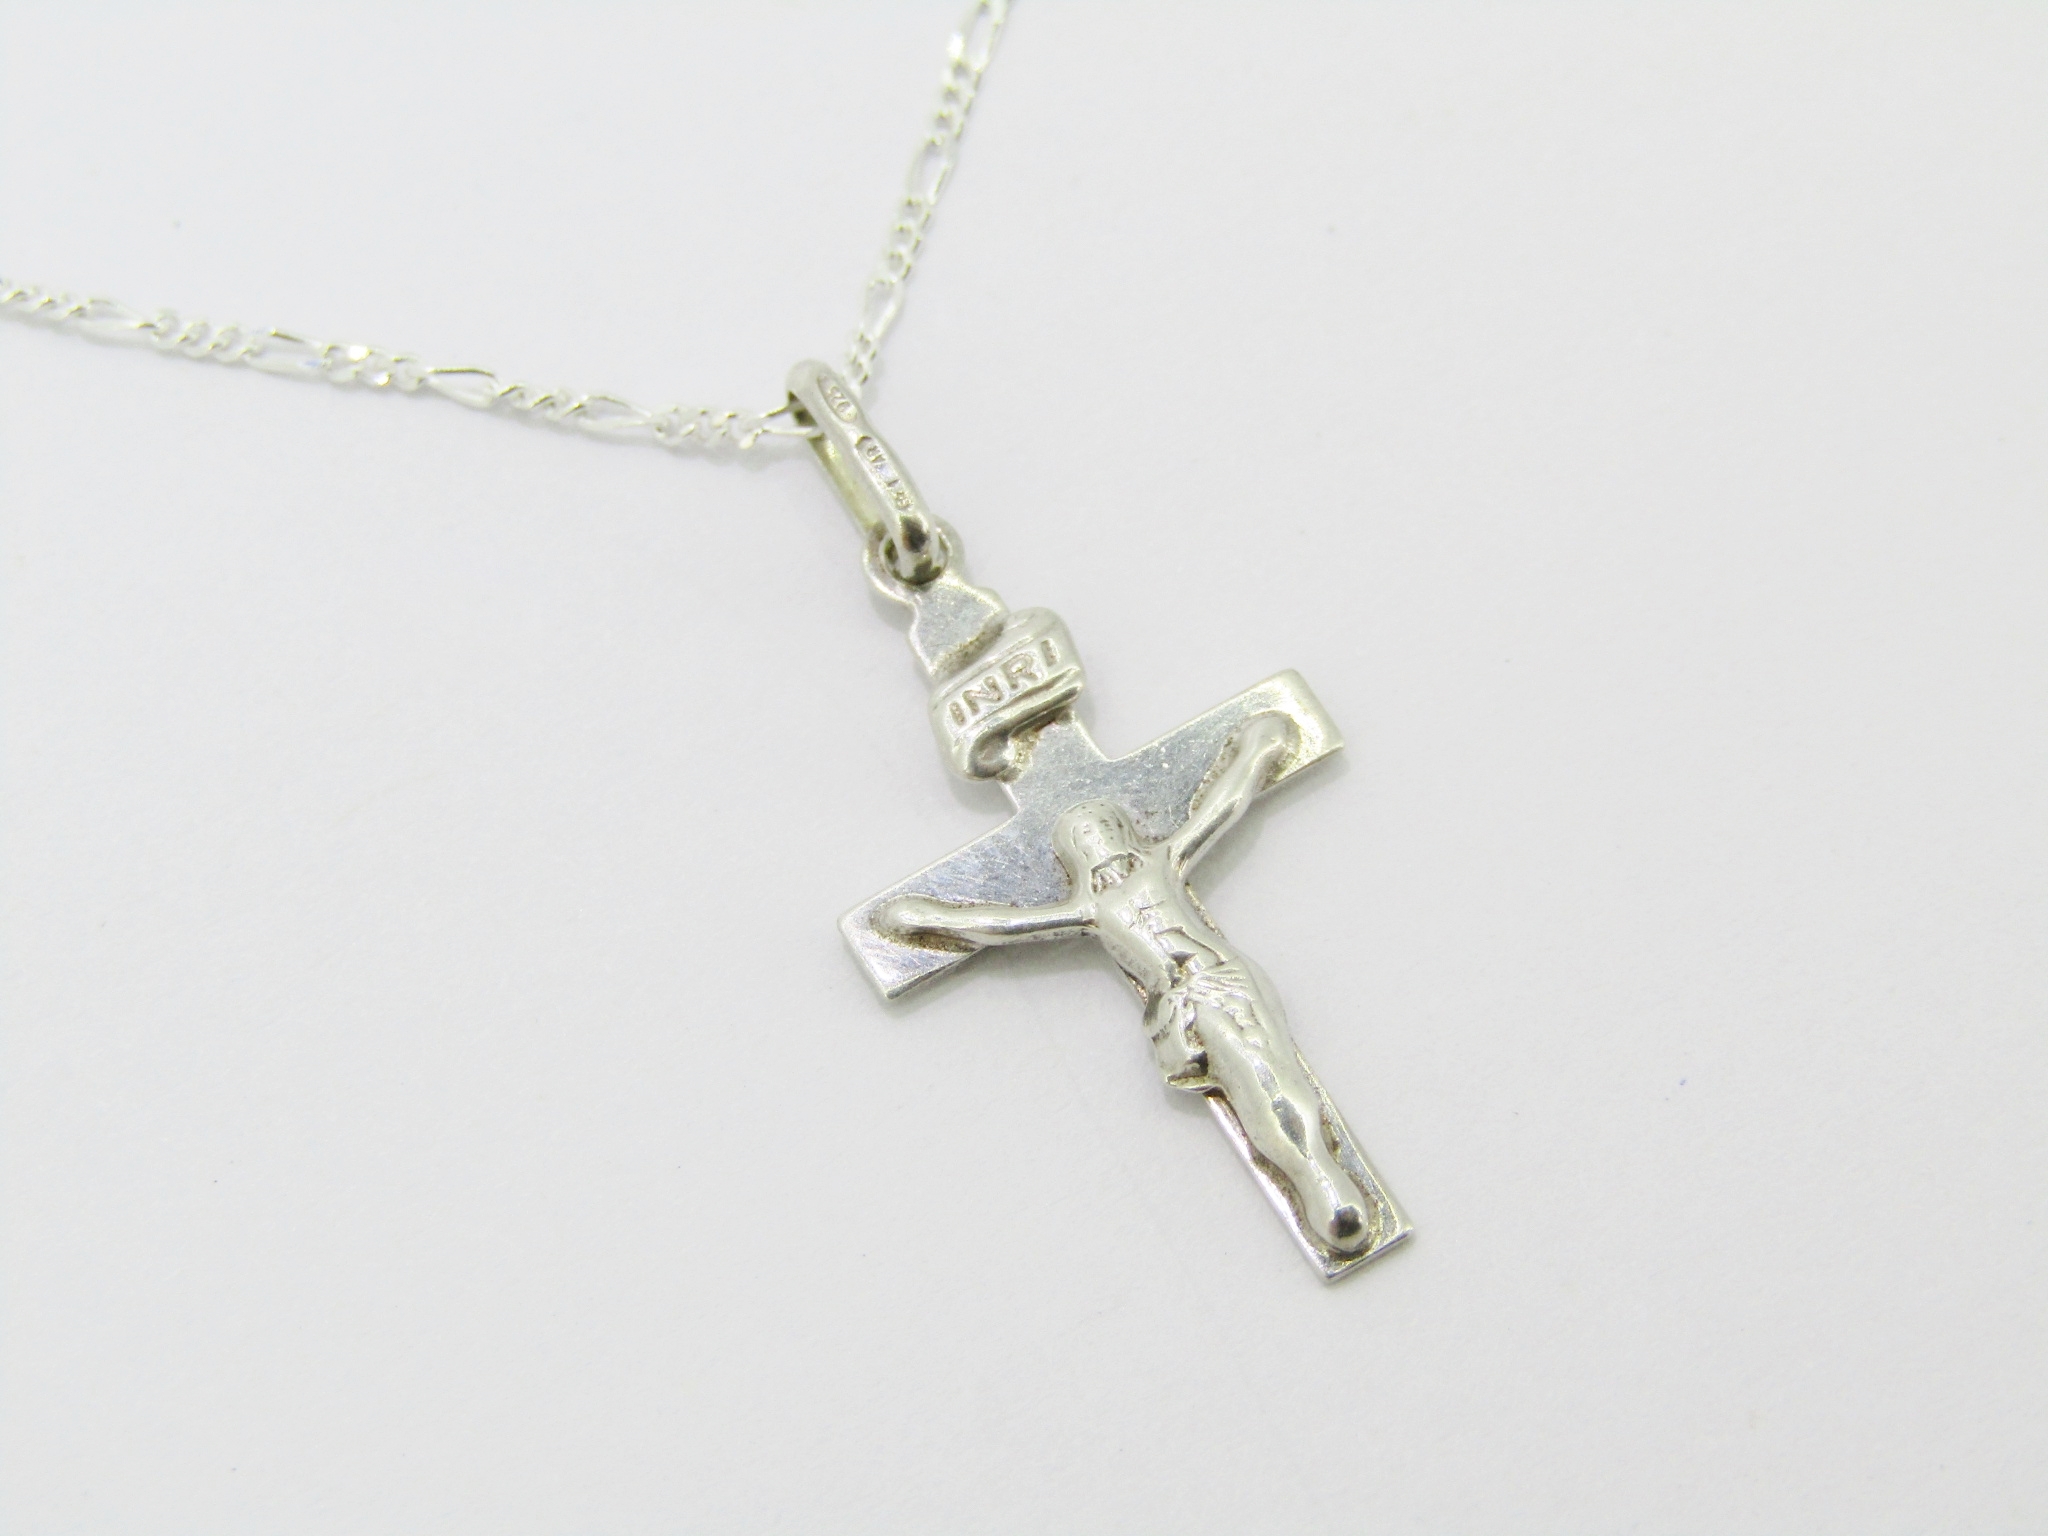 A Beautiful Dainty Crucifix Pendant On Chain in Sterling Silver.